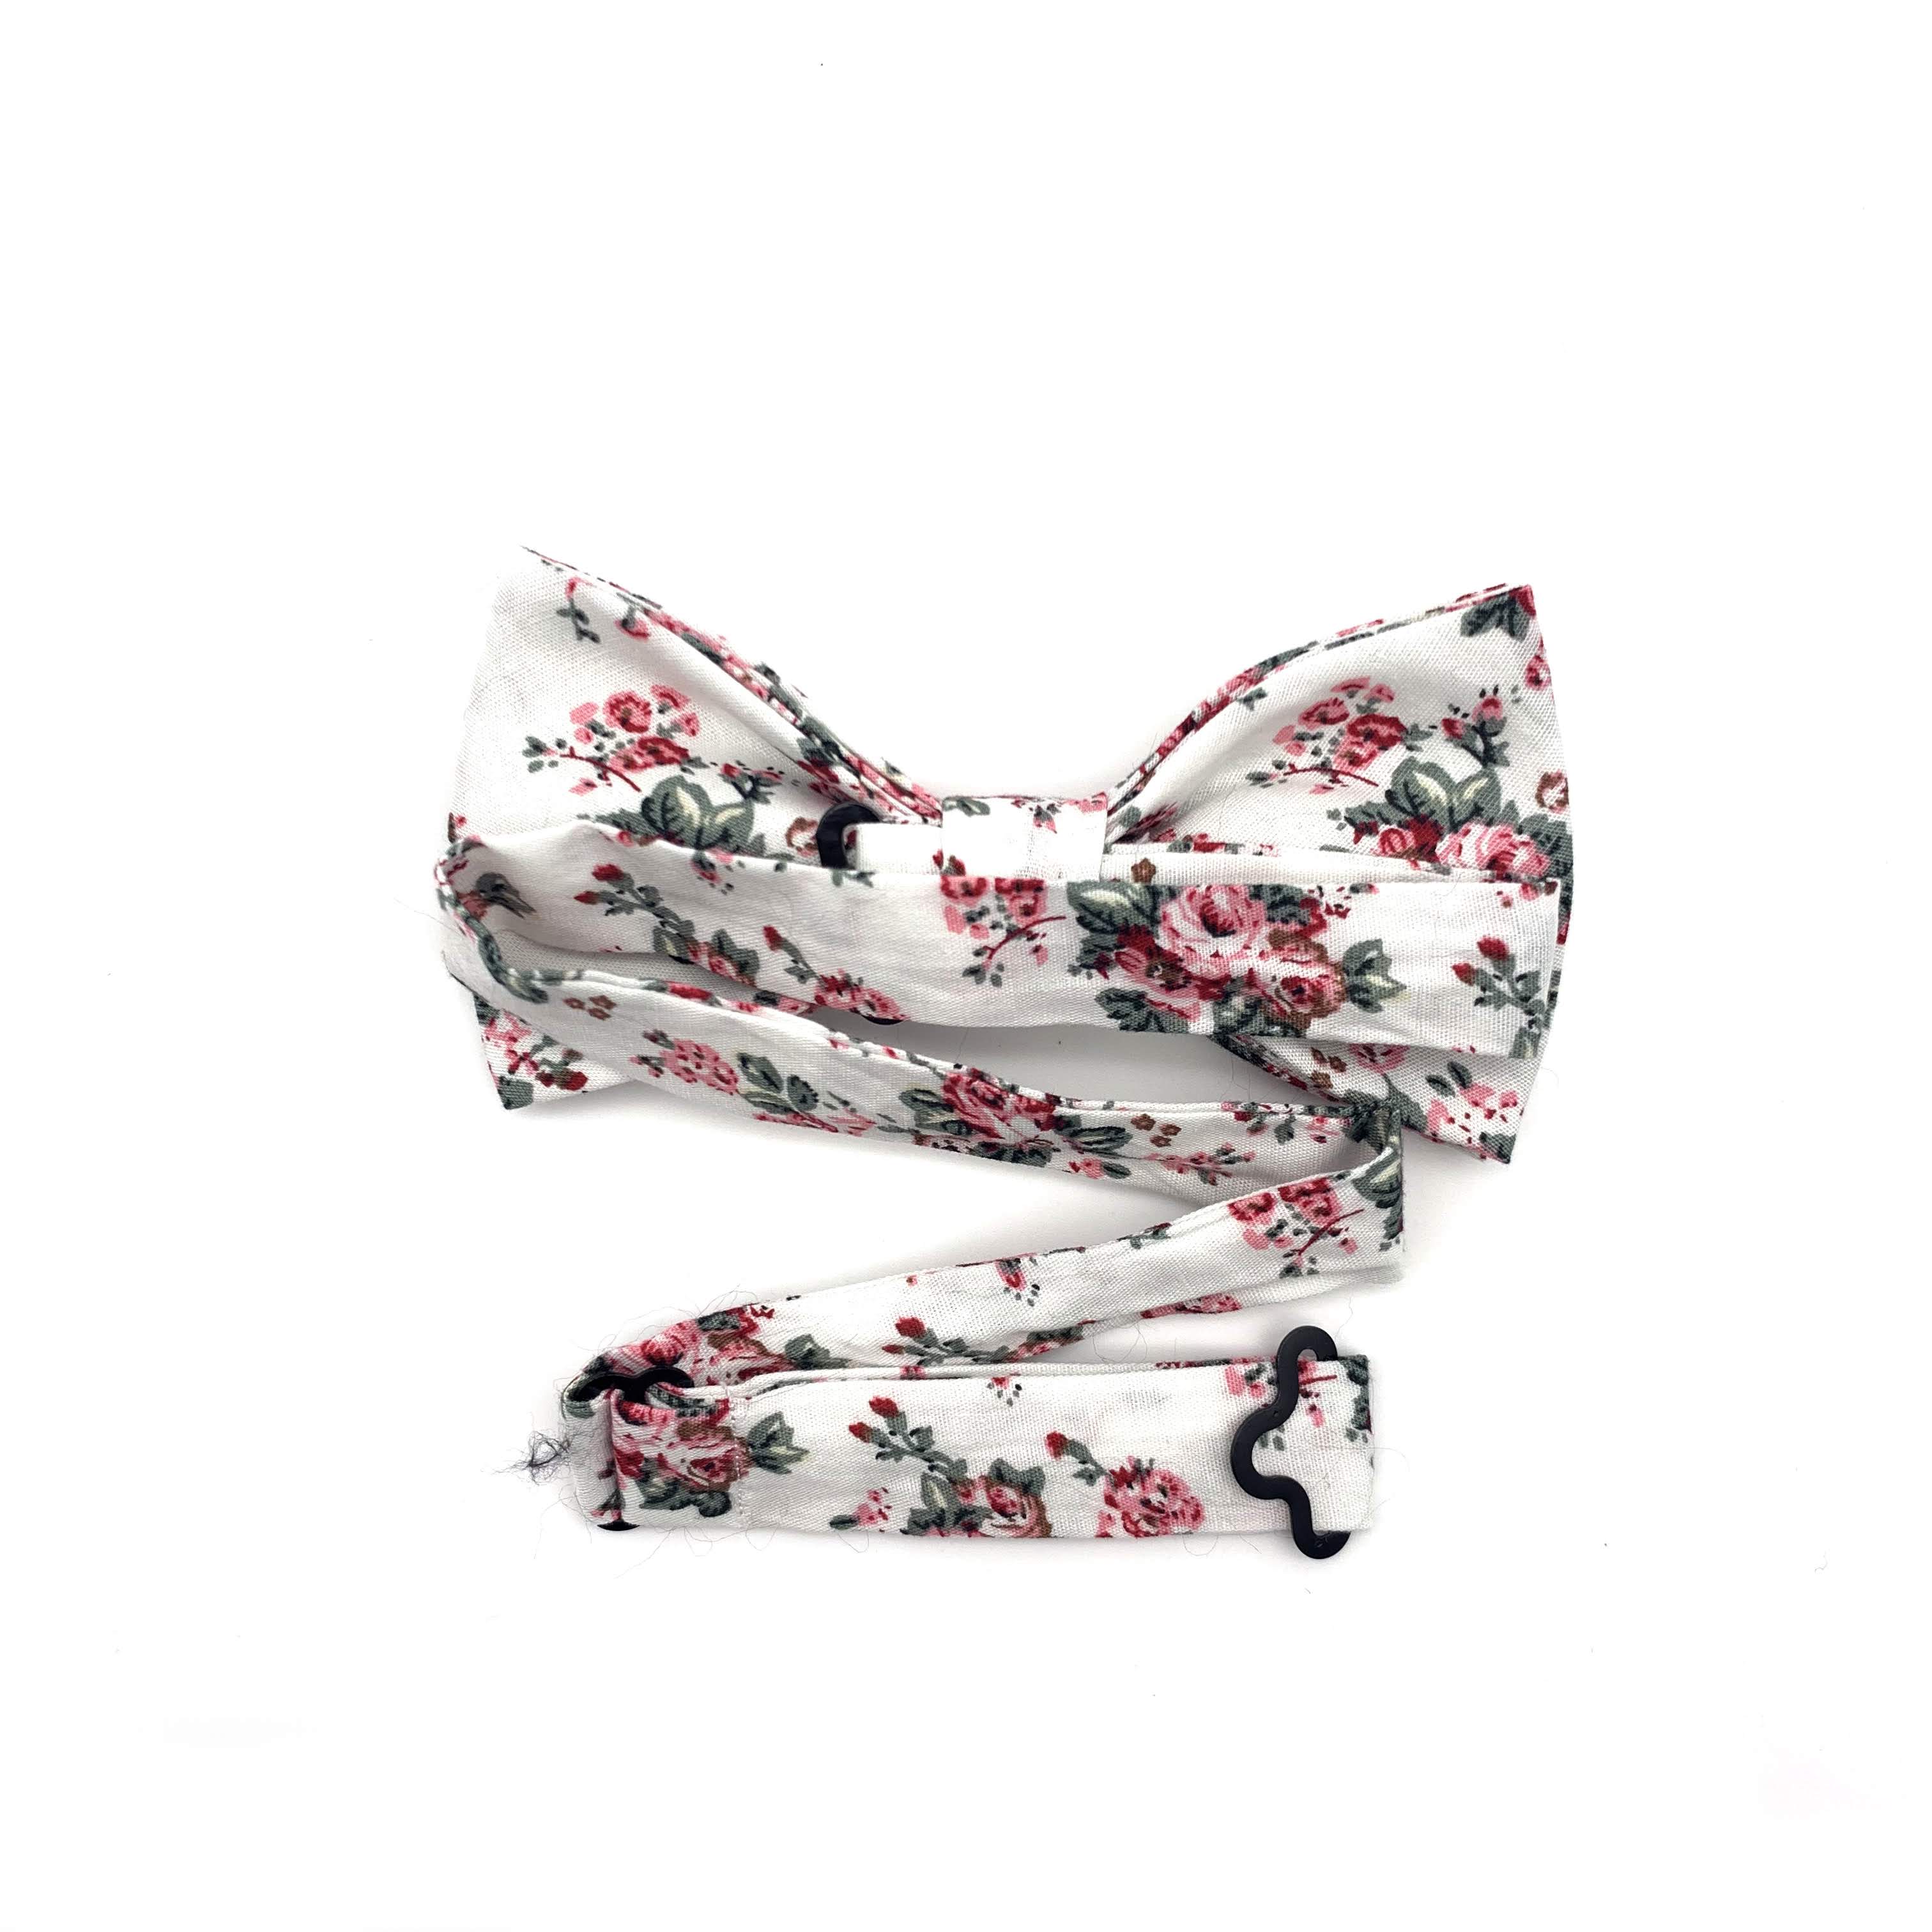 White Floral Bow Tie with Pink Flowers for Men (ABDIEL)-White Floral Bow Tie (Pre-tied) 100% Cotton Flannel Handmade Adjustable to fit most neck sizes 13 3/4&quot; - 18&quot; Color: White Great for Prom Dinners Interviews Photo shoots Photo sessions Dates Groom to stand out between his Groomsmen pair them up with neckties while he wears the Floral bow tie. Floral bow tie for weddings and events. Great anniversary present and gift. Also great gift for the groom and his groomsmen to wear at the wedding, and